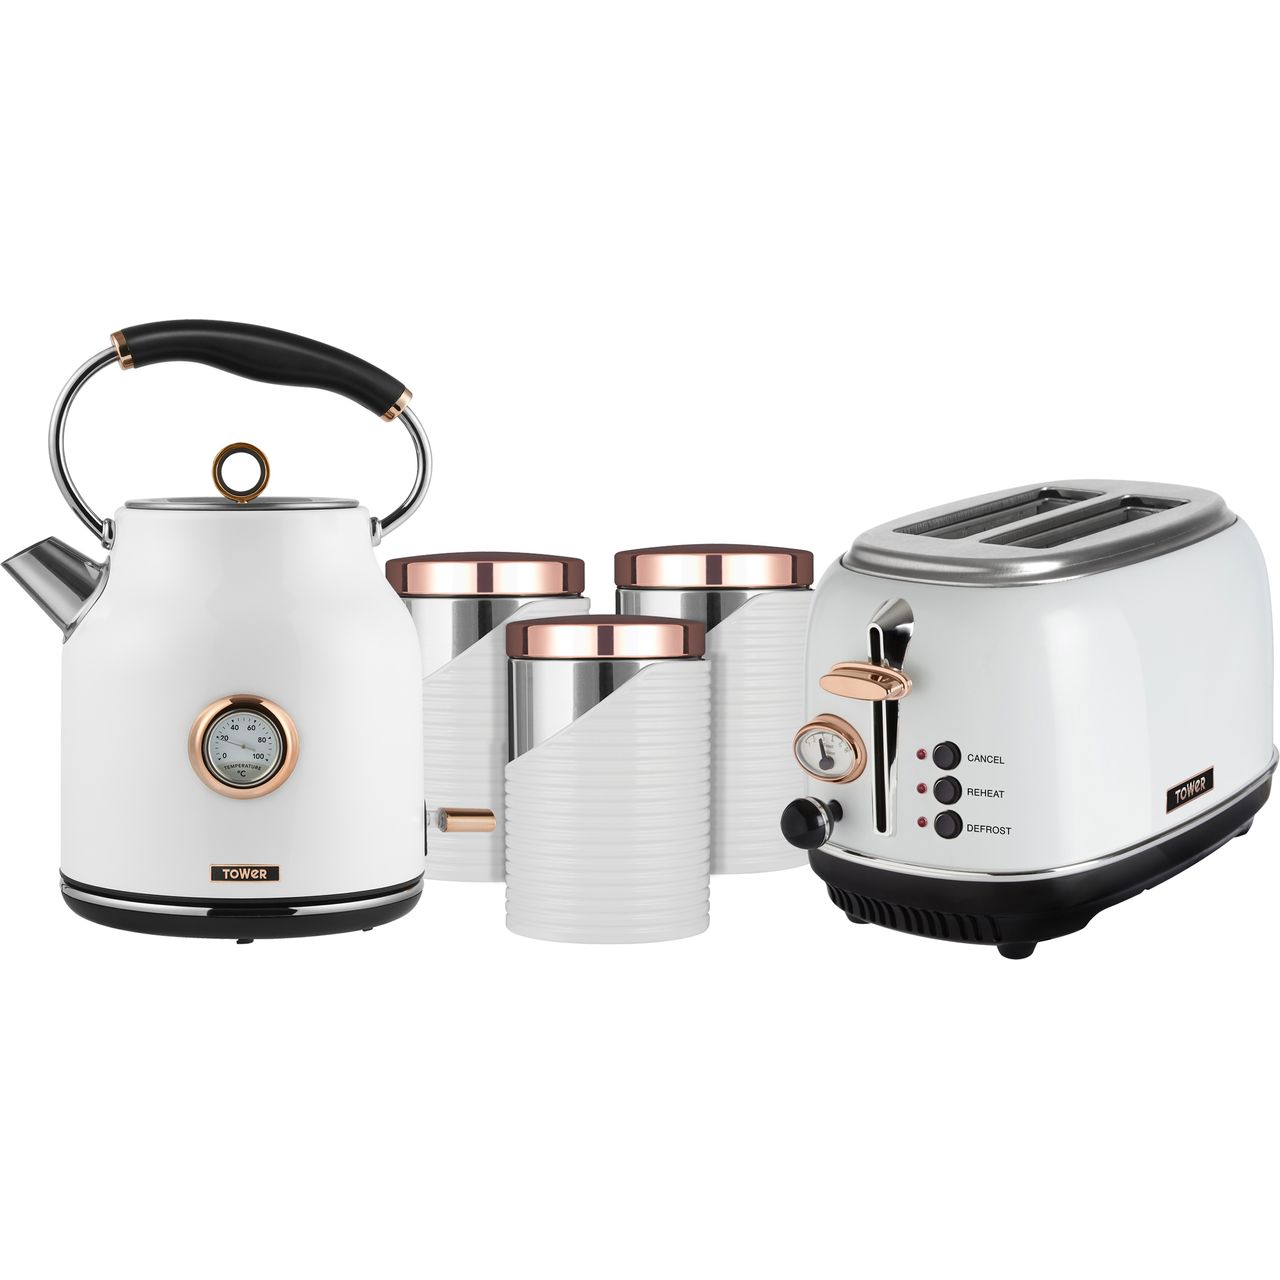 Tower AOBUNDLE008 Kettle And Toaster Sets Review